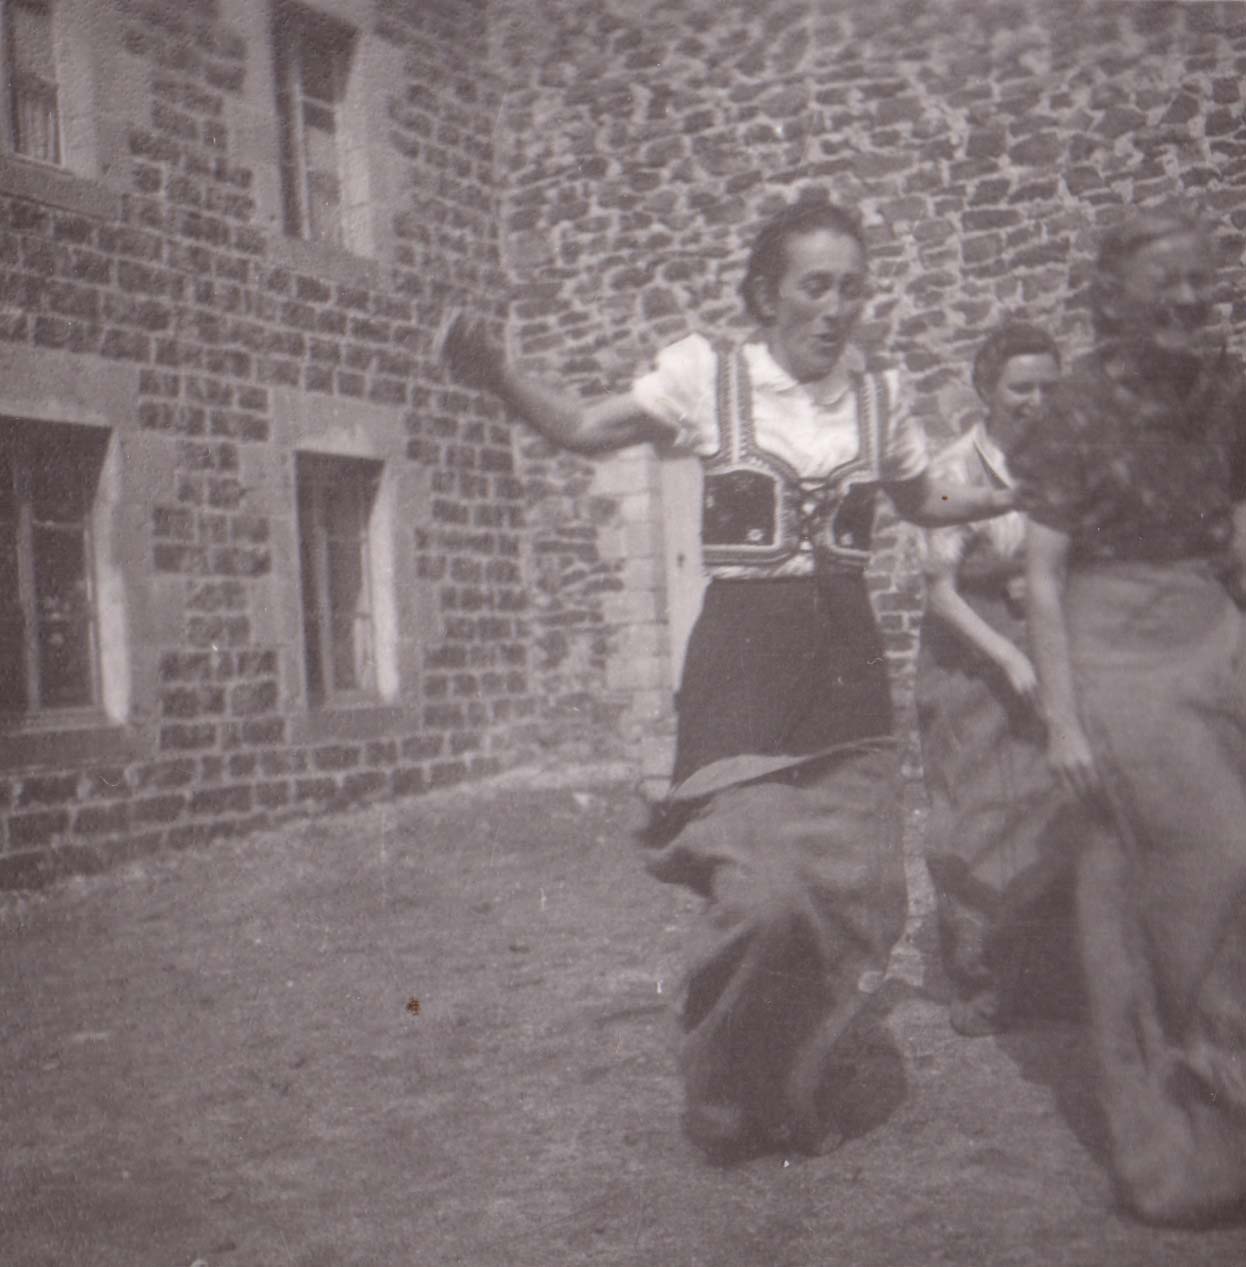 Magda Trocmé participated in a sack race